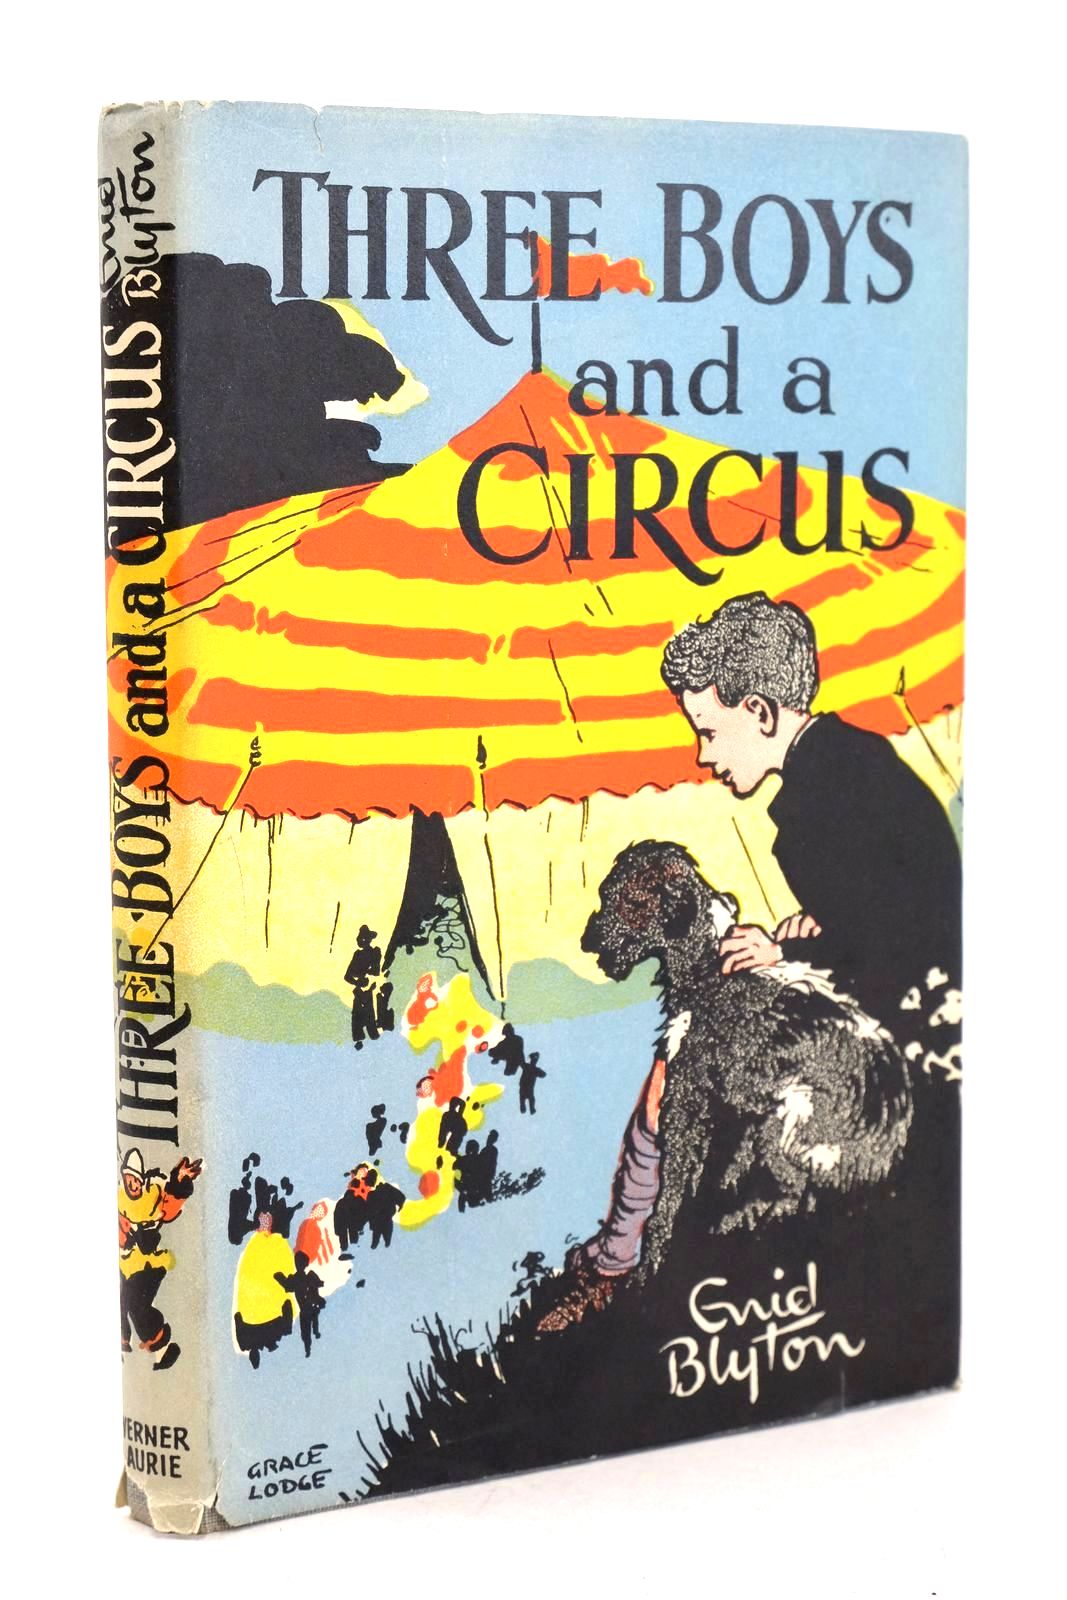 Photo of THREE BOYS AND A CIRCUS written by Blyton, Enid illustrated by Lodge, Grace published by Werner Laurie (STOCK CODE: 1326777)  for sale by Stella & Rose's Books